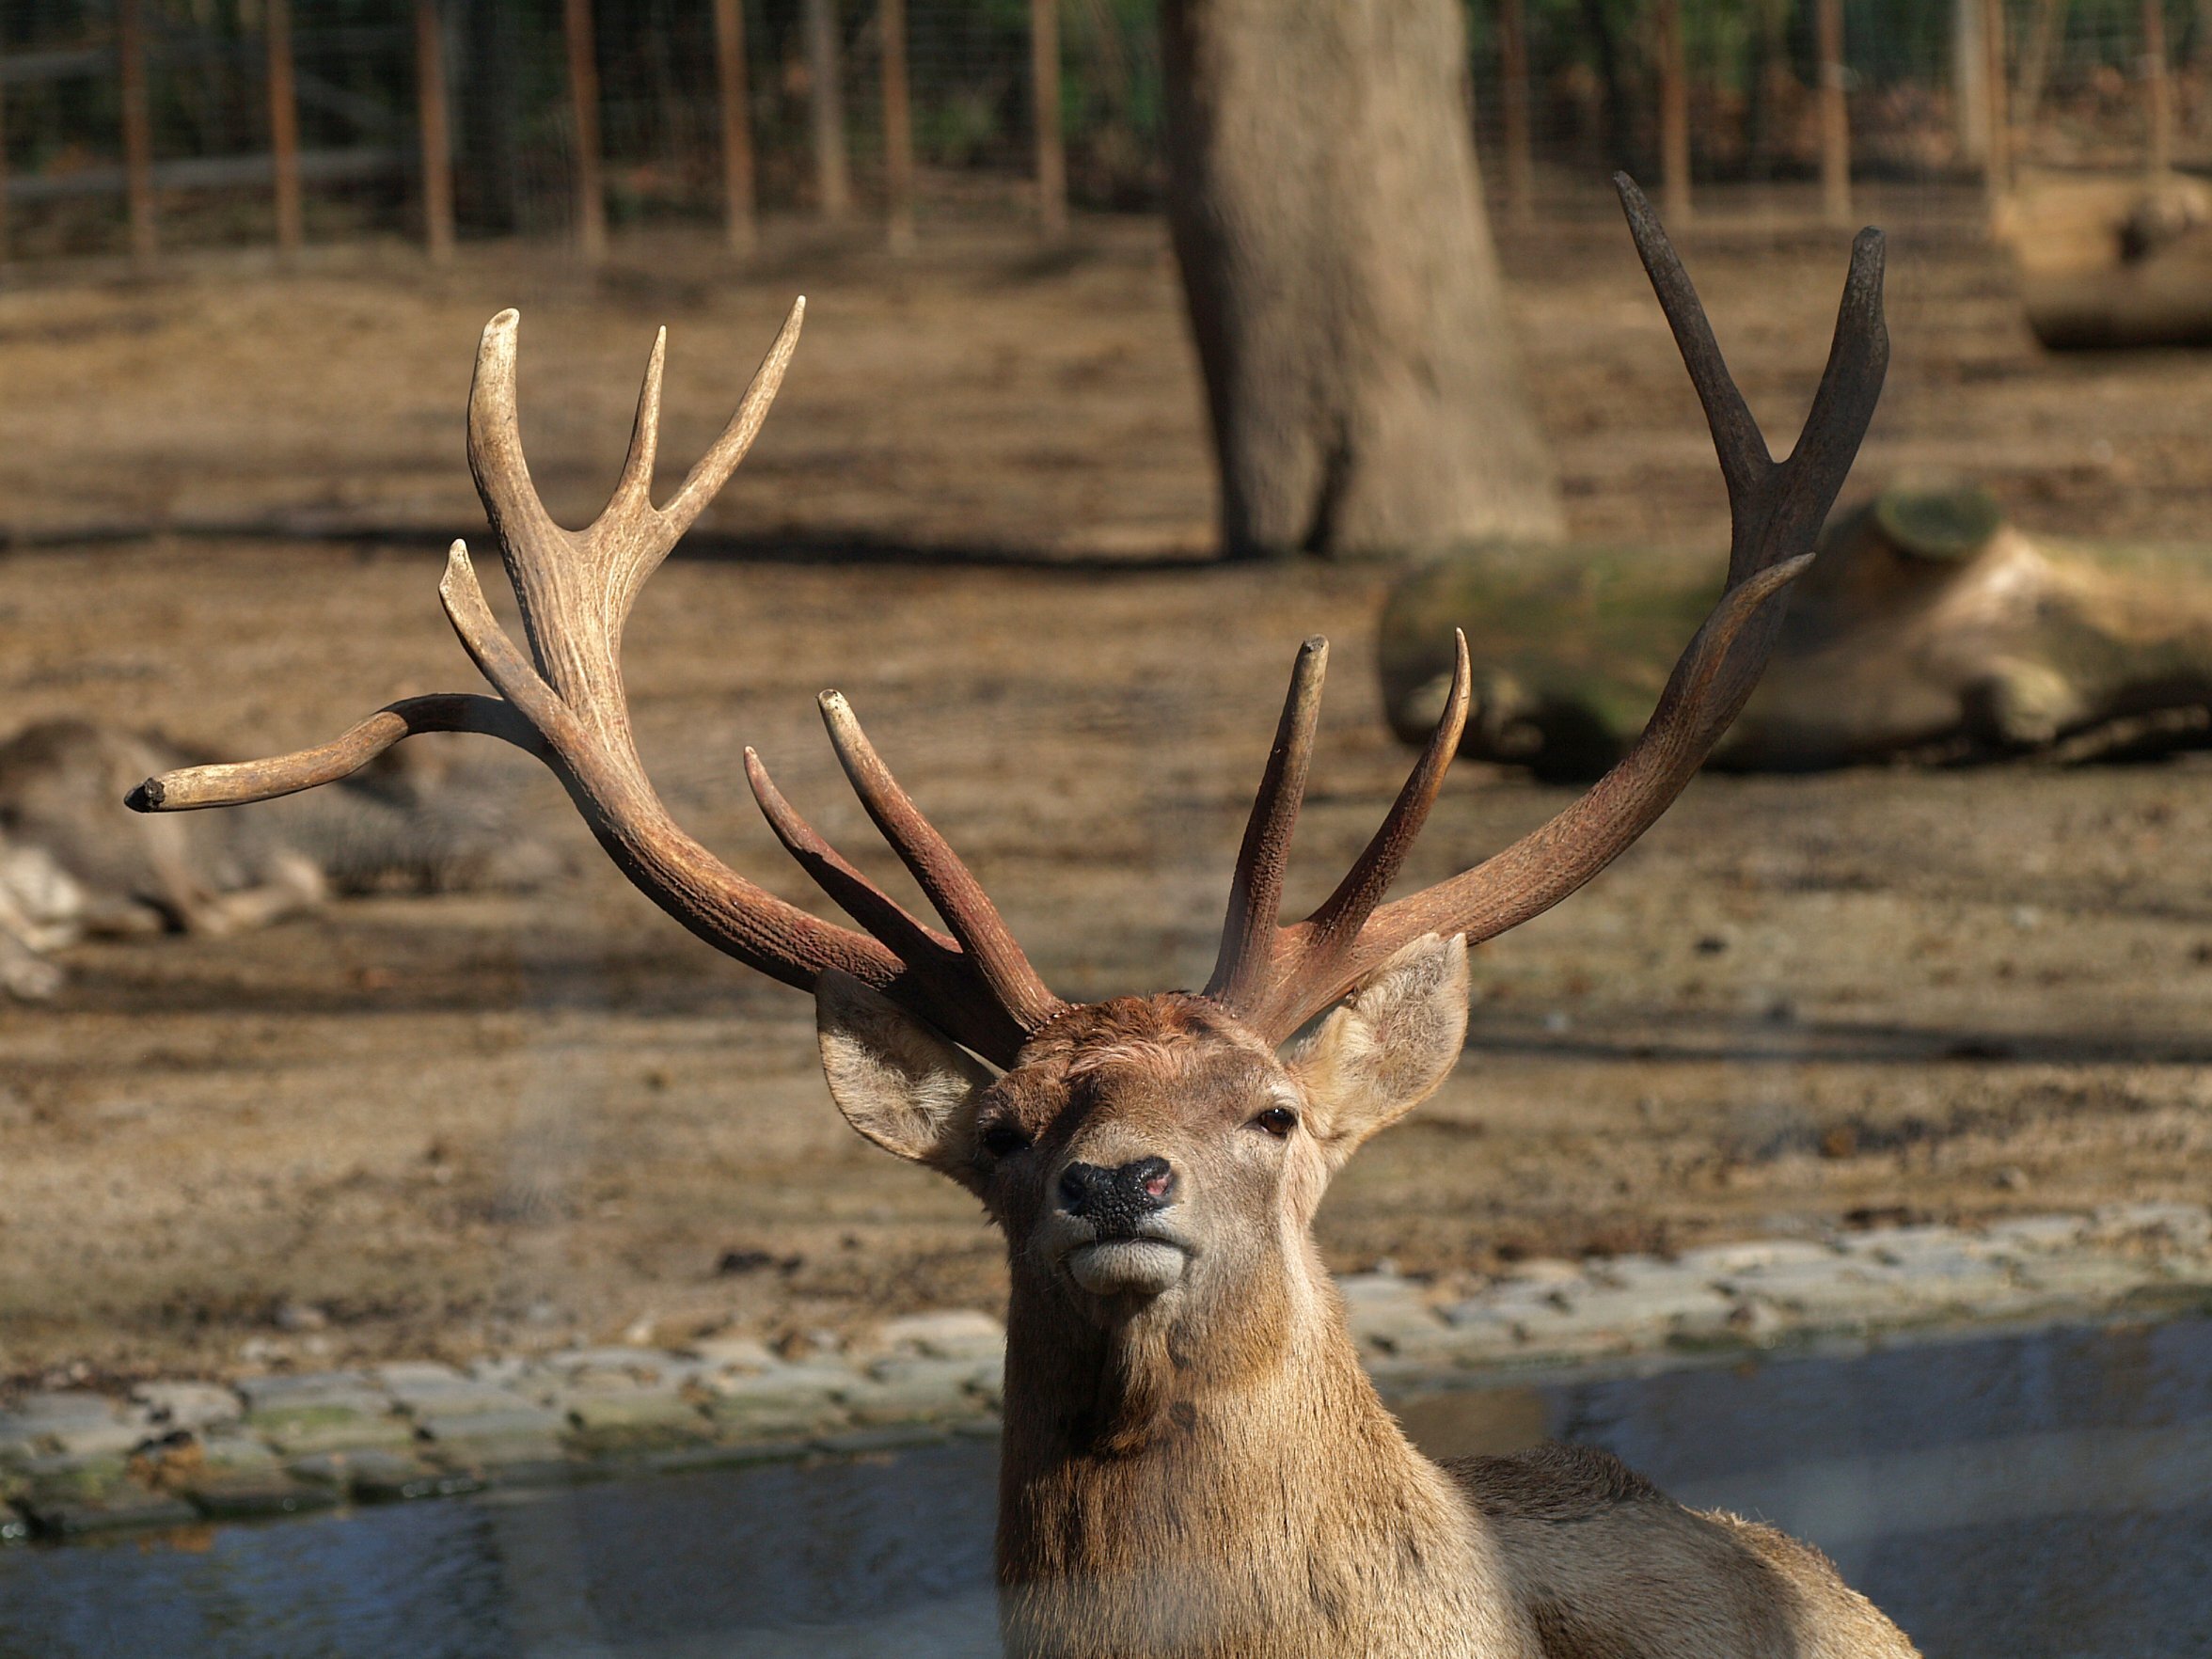 PICTURED: A Bukhara deer stag (cervus elaphus bactrianus) at the Cologne Zoo. Photo credit Sarefo. CC 2.0.